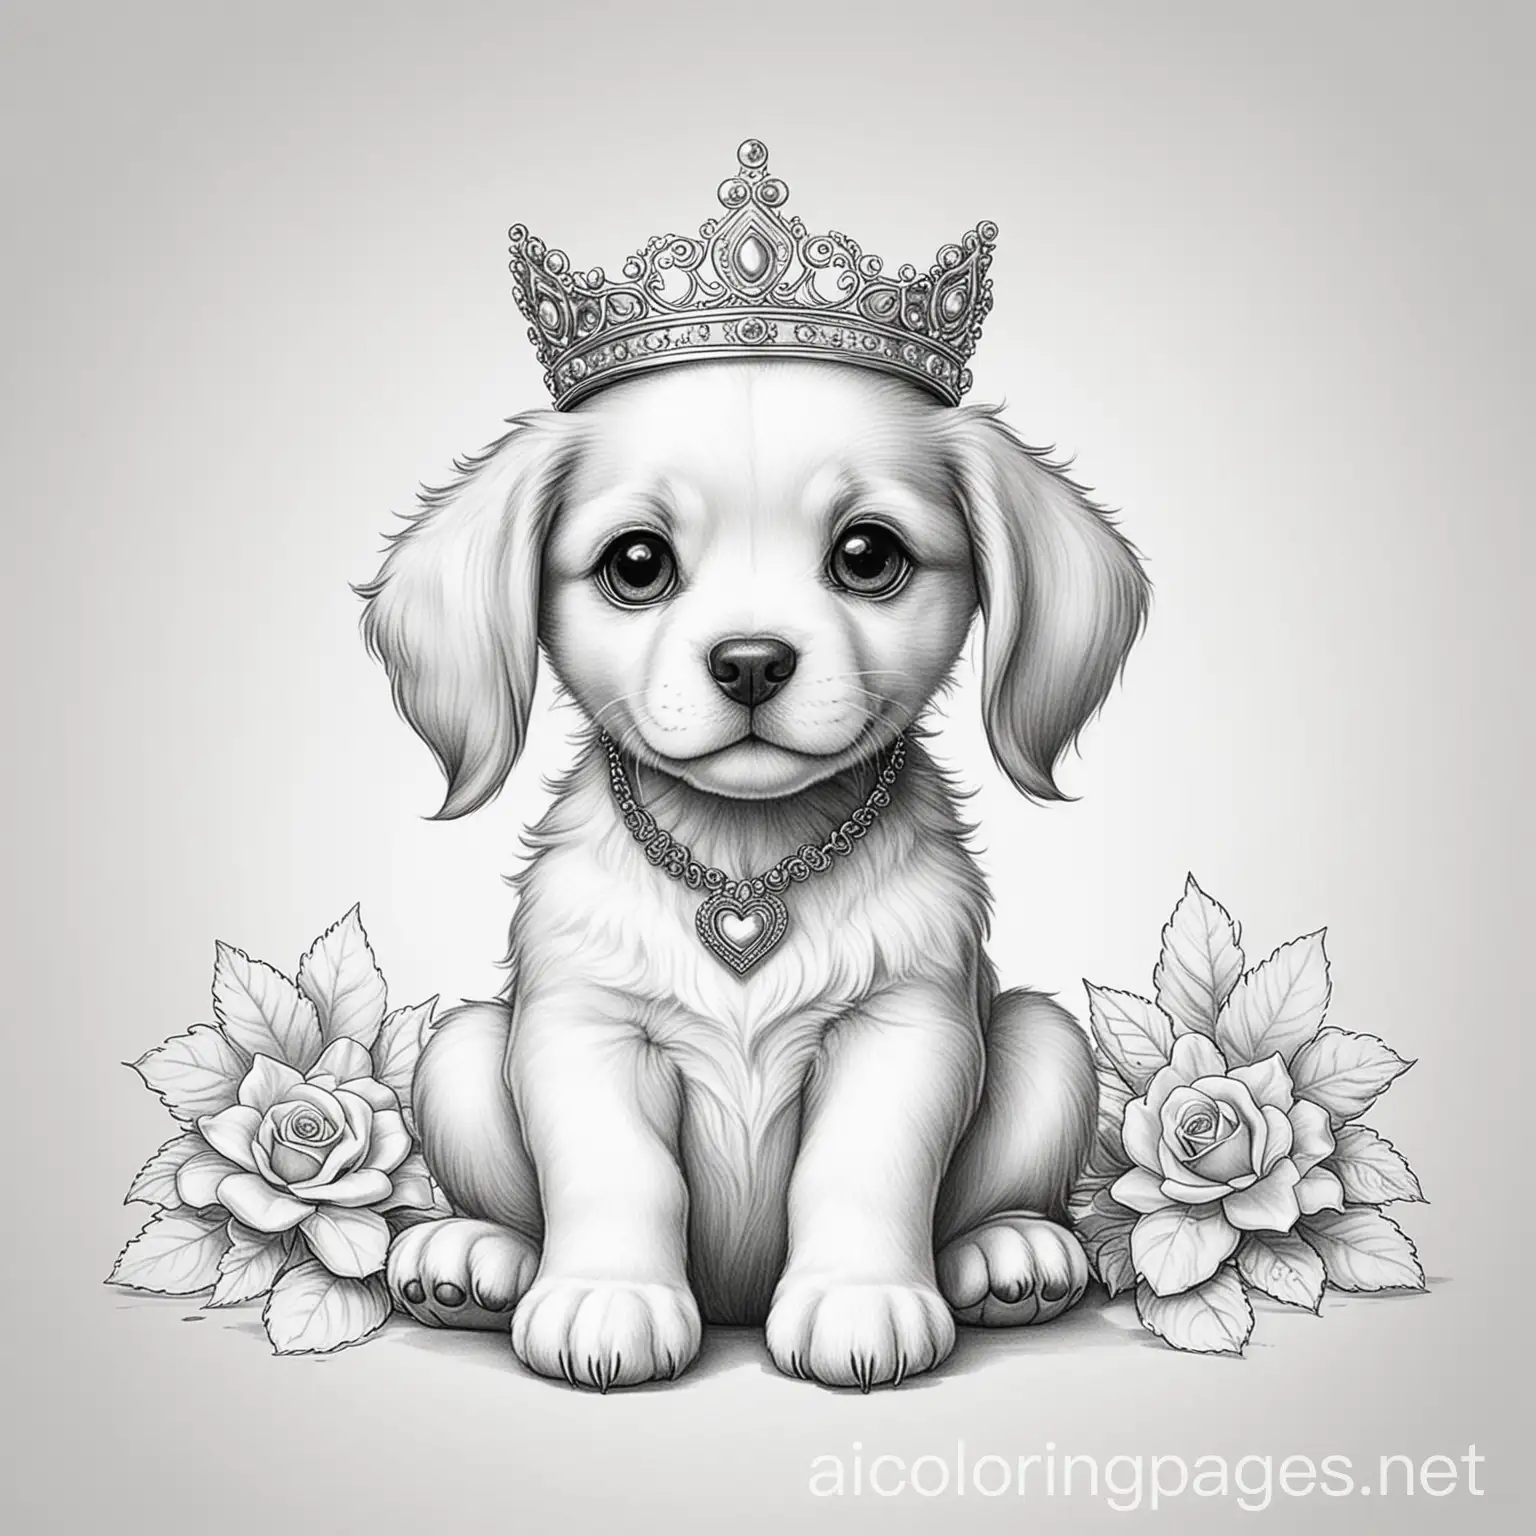 Adorable-Puppy-Princess-Coloring-Page-Simple-Line-Art-on-White-Background